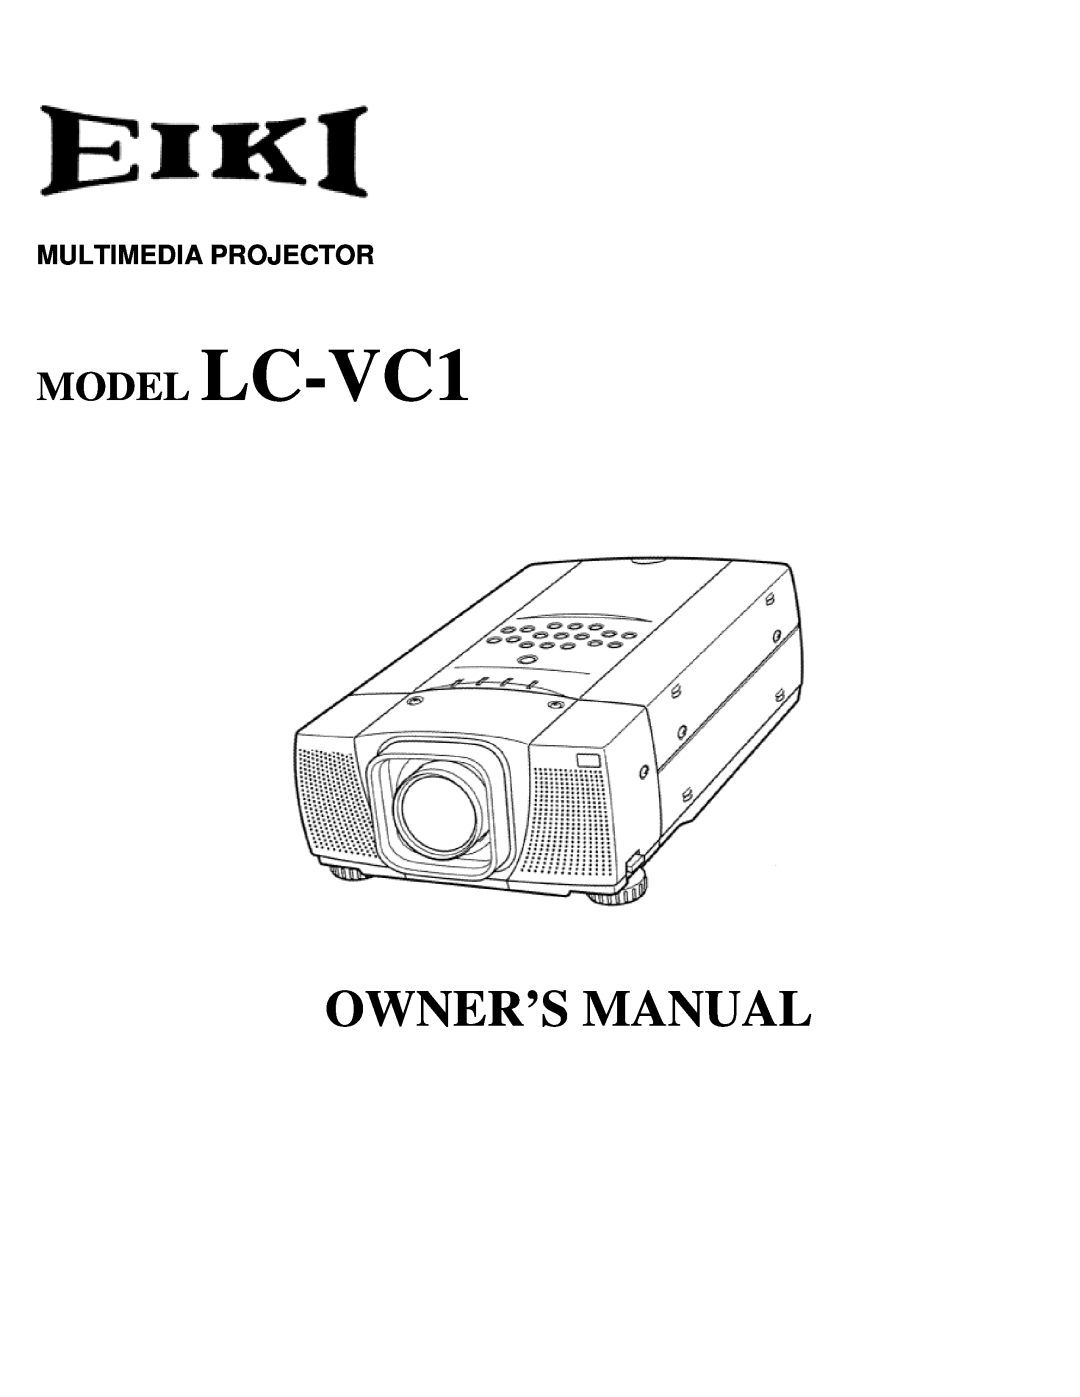 Eiki owner manual Multimedia Projector, MODEL LC-VC1 